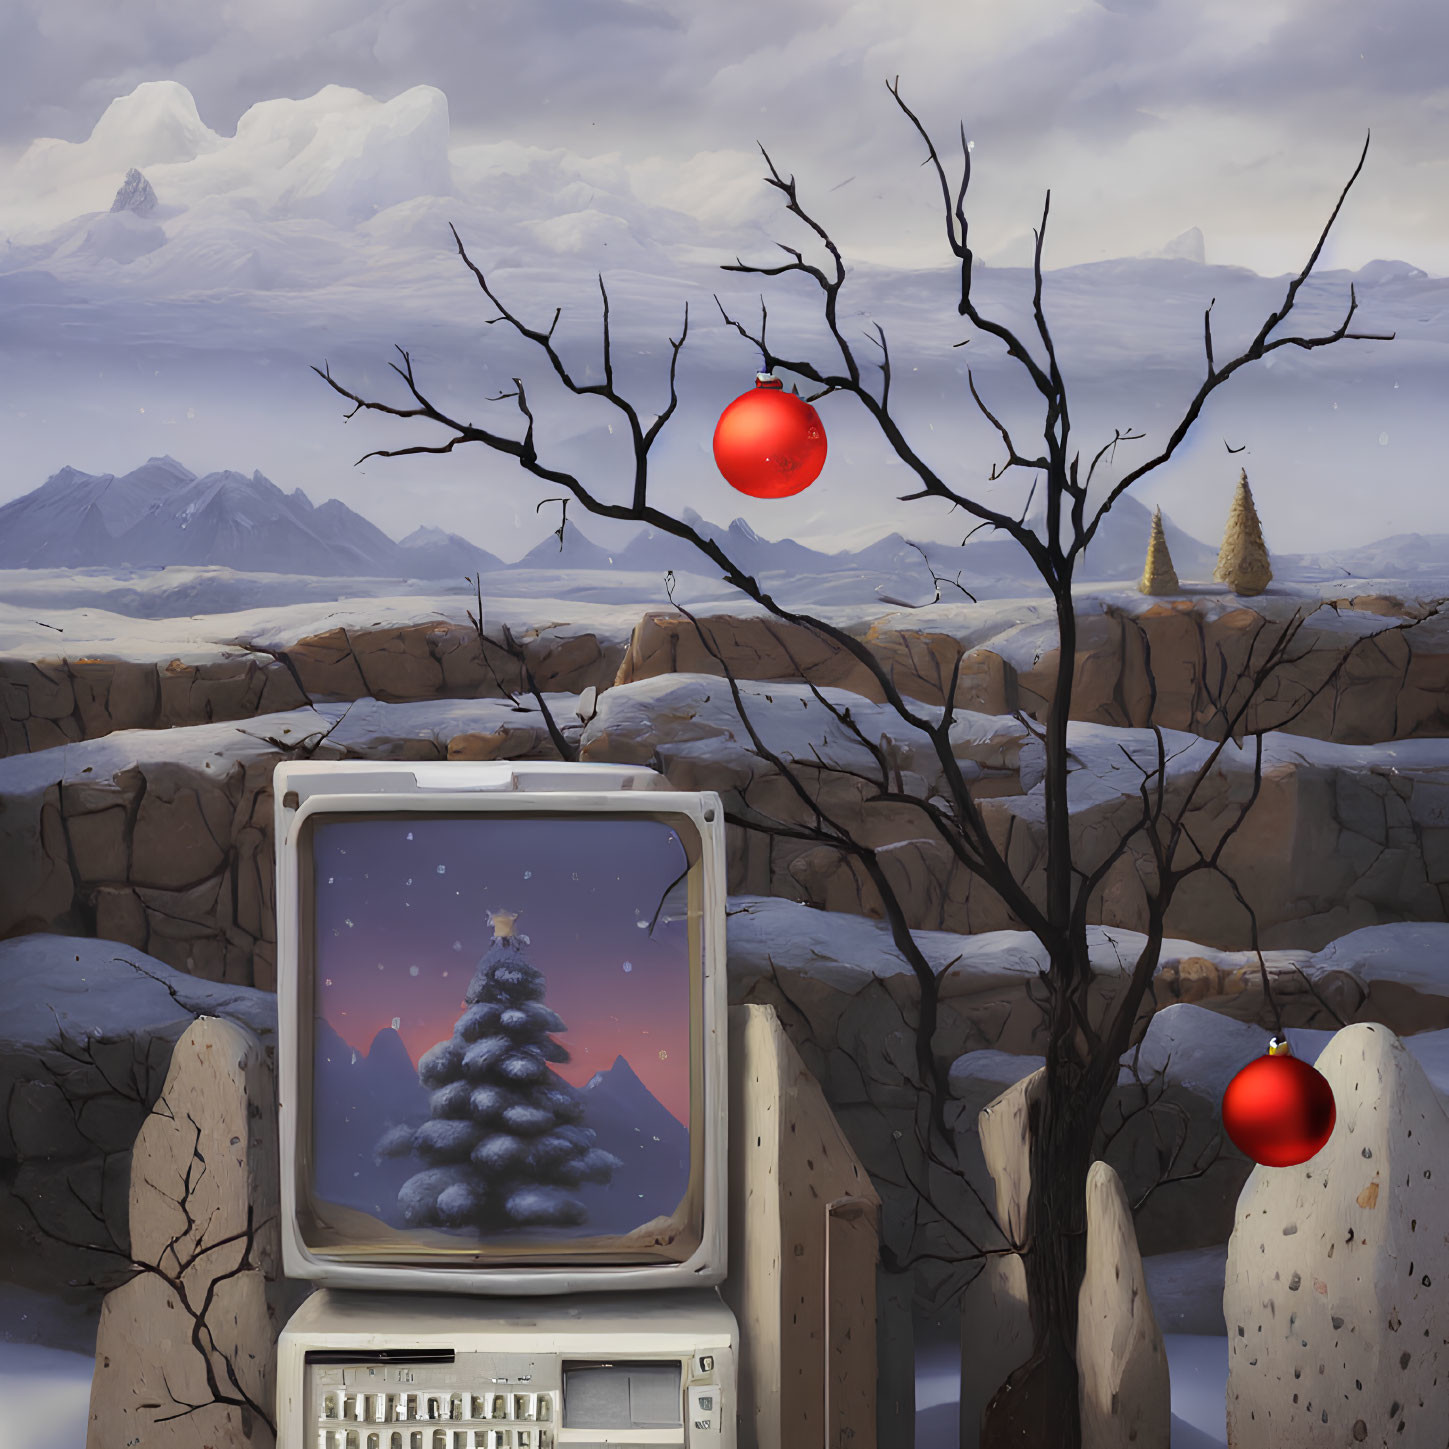 Vintage computer displays wintry Christmas scene with snowy tree and red ornament.